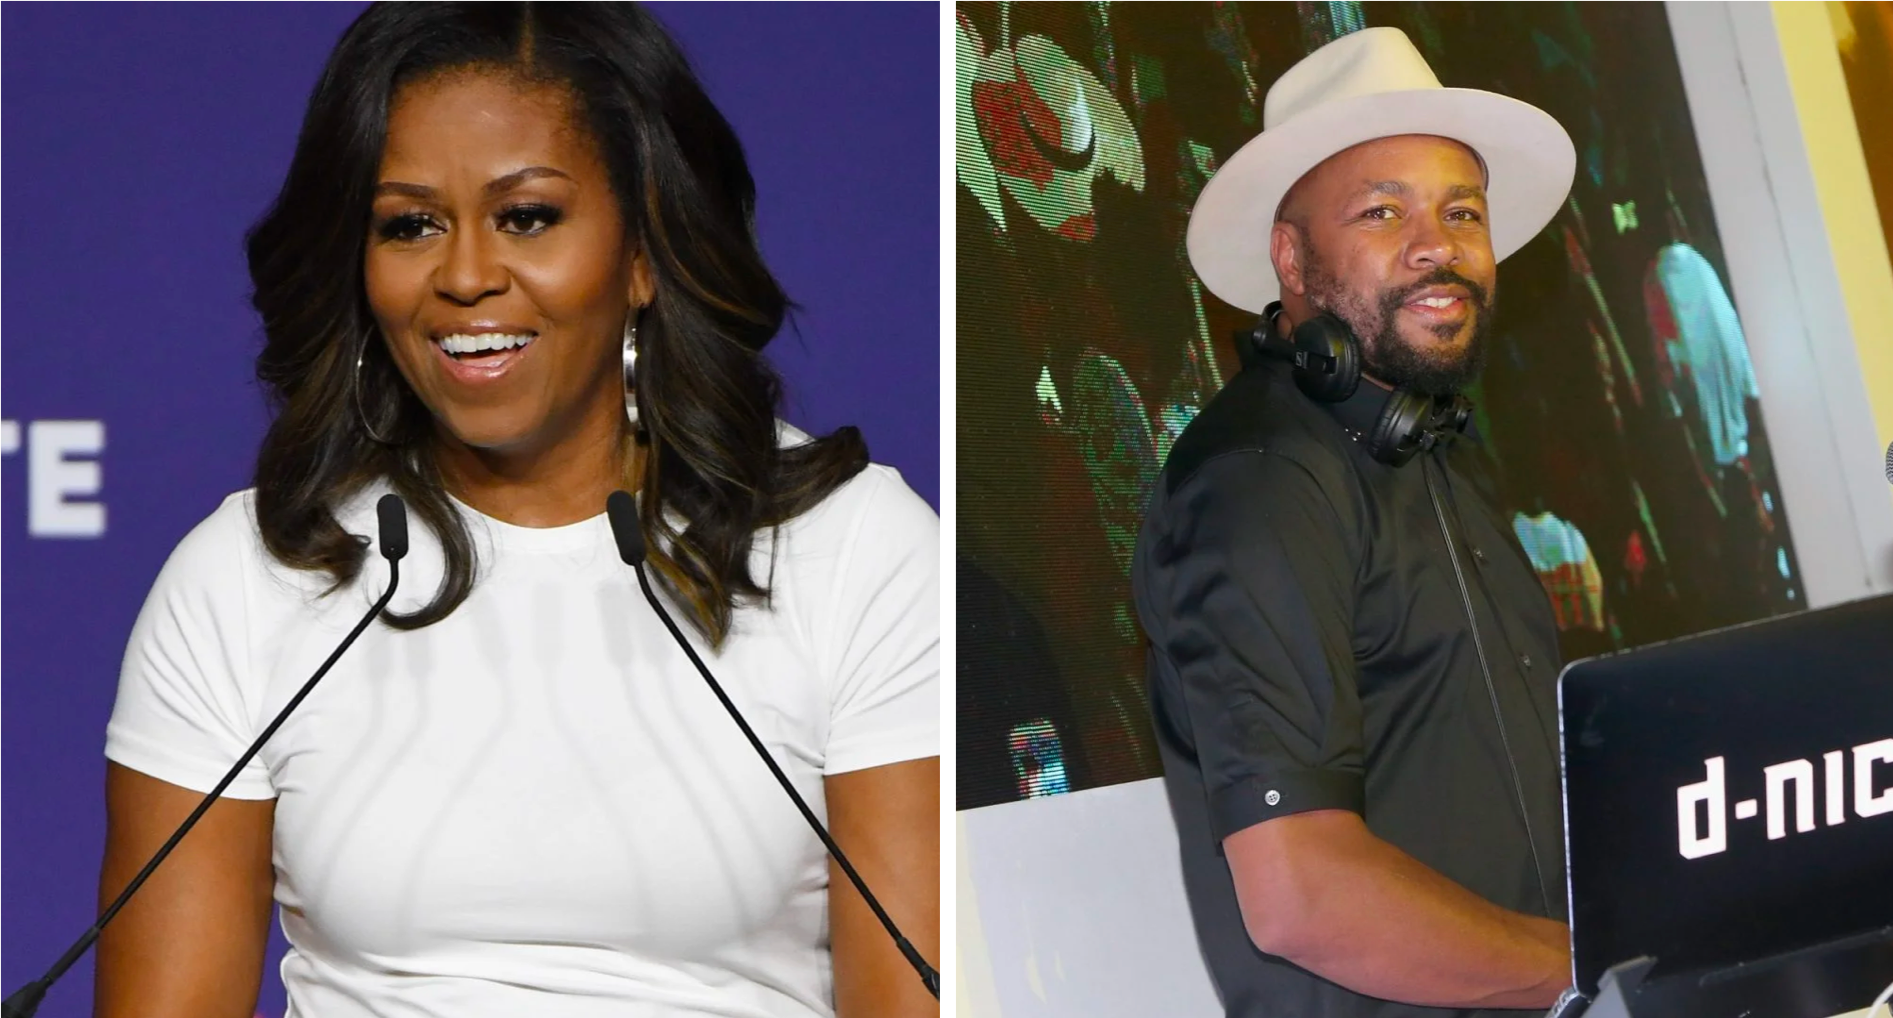 Michelle Obama And DJ D-Nice Are Teaming Up To Throw A Virtual Party